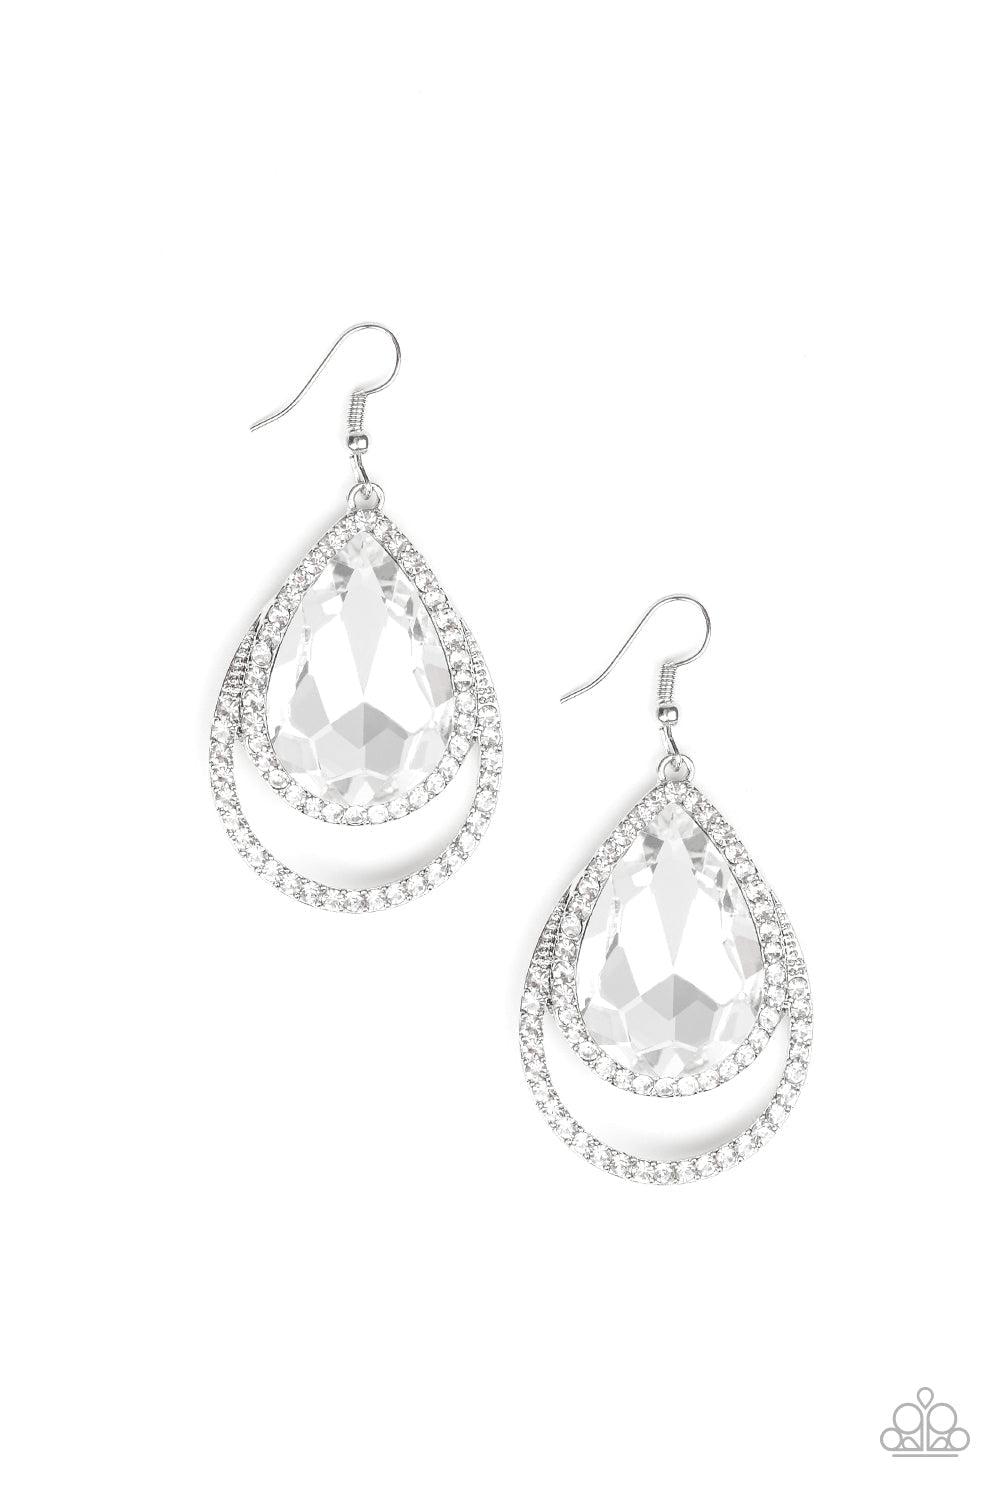 Famous White Earrings - Paparazzi Accessories- lightbox - CarasShop.com - $5 Jewelry by Cara Jewels